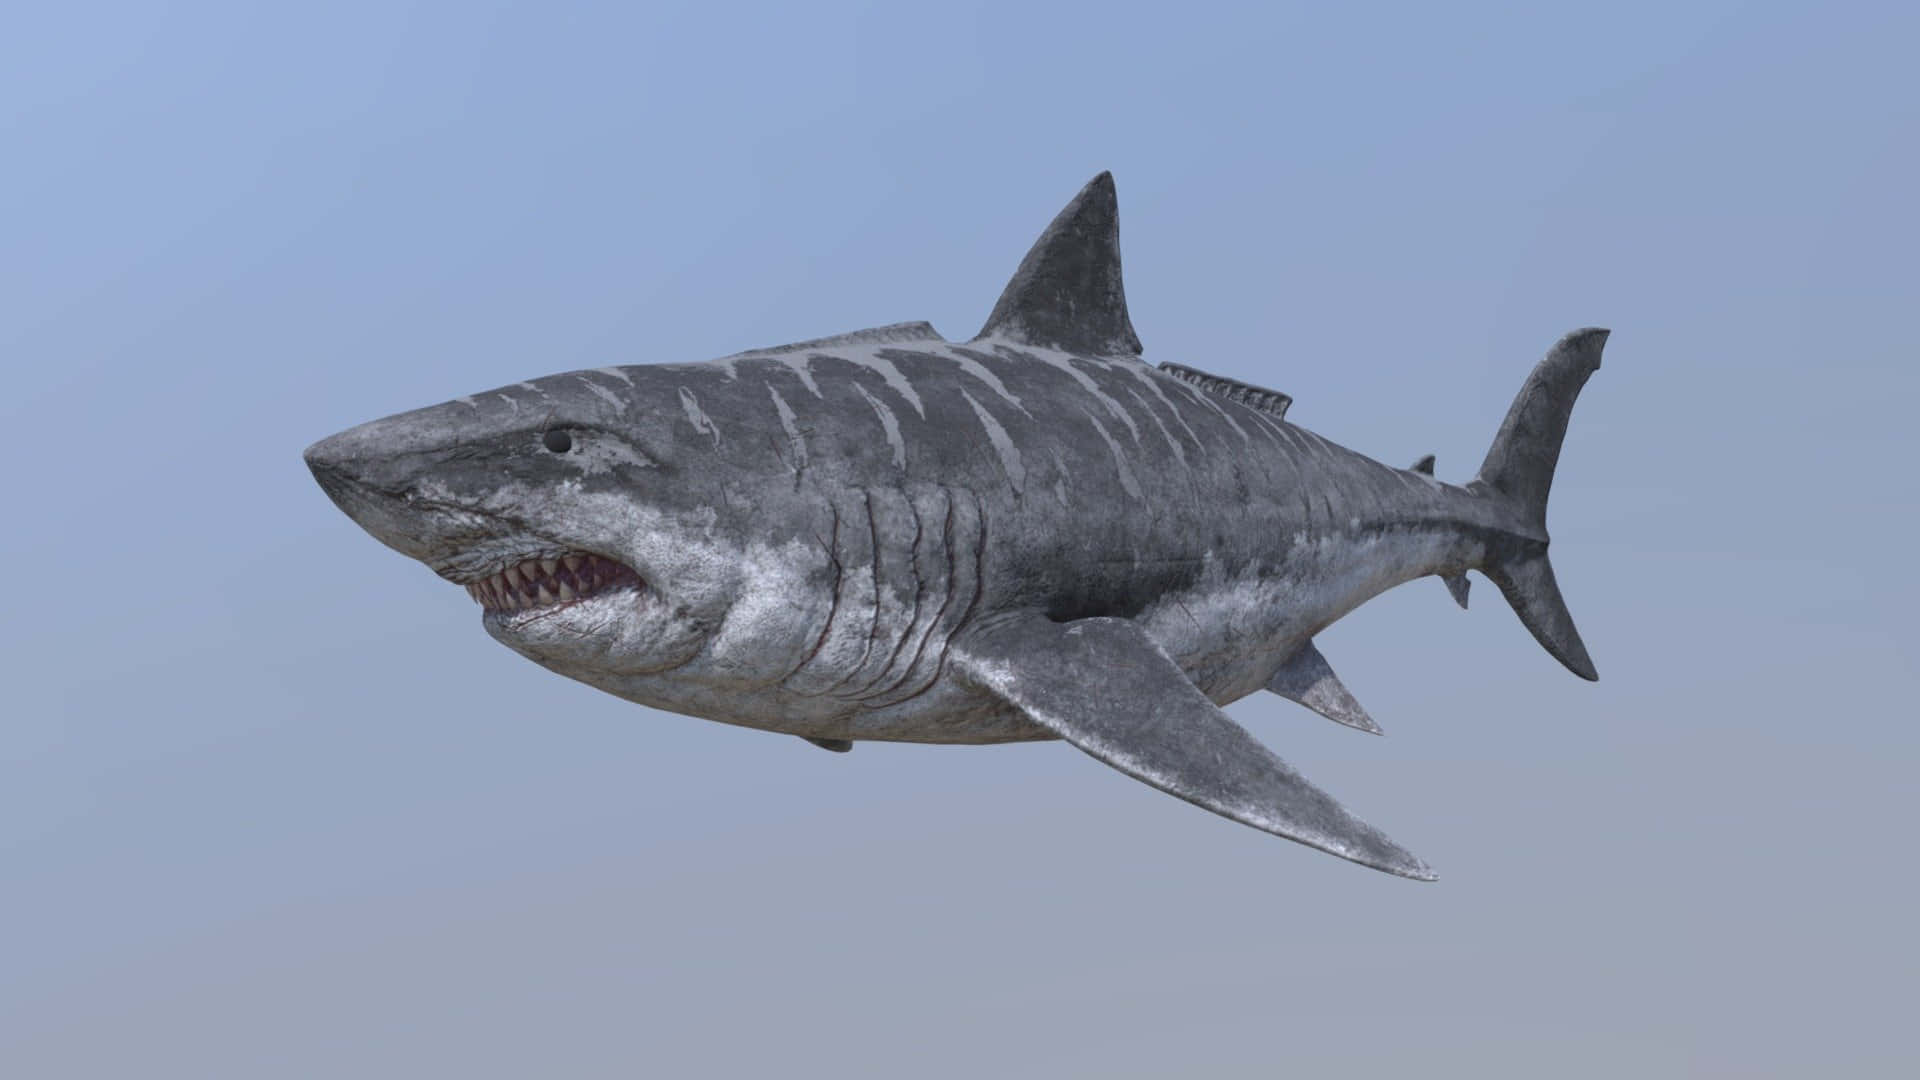 A 3d Model Of A Shark Flying In The Sky